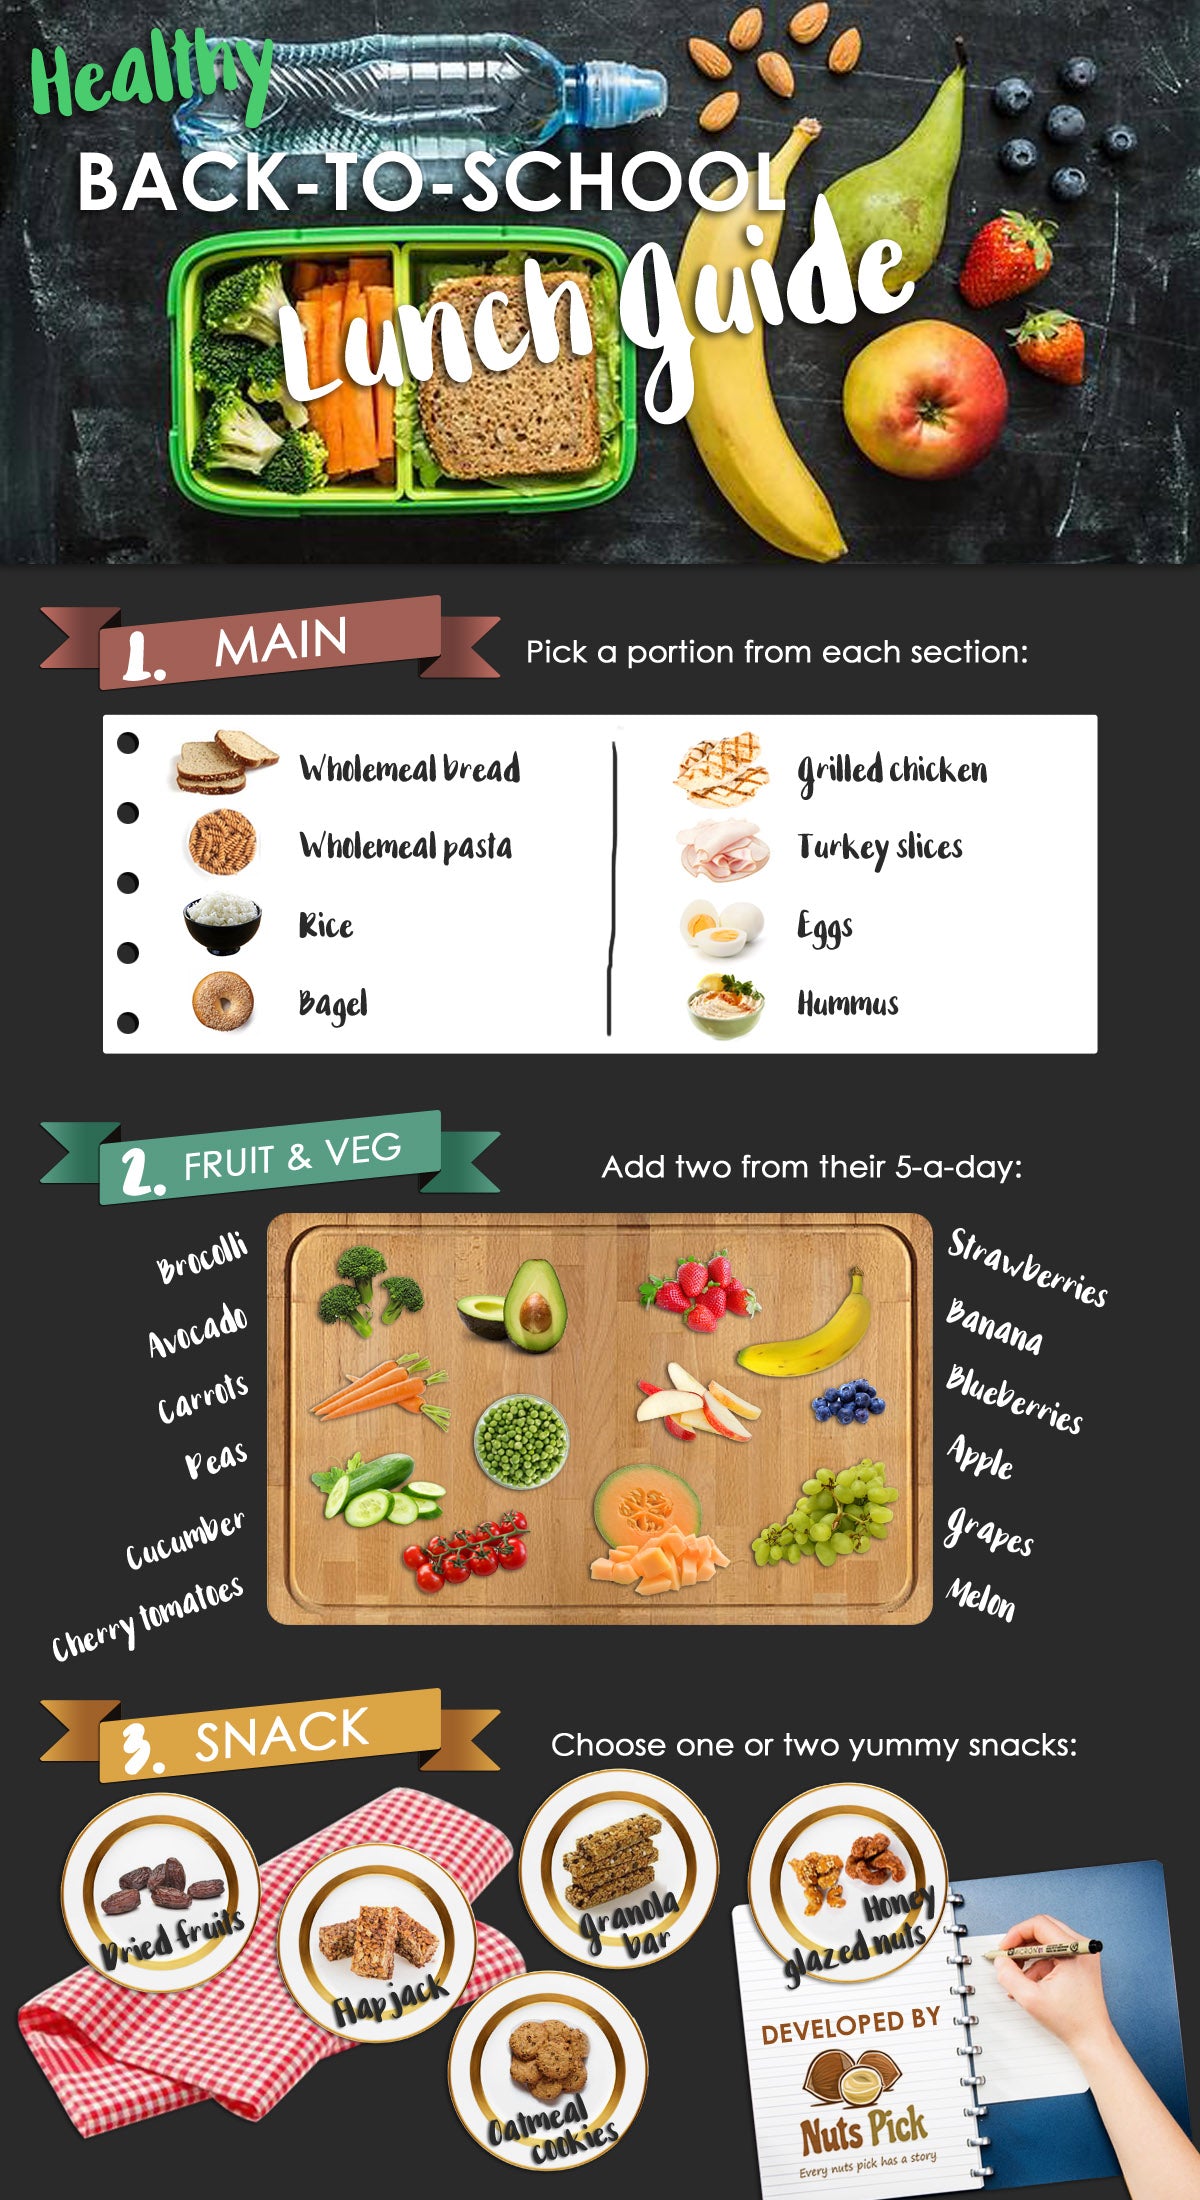 Back-to-school healthy lunch guide infographic by Nuts Pick